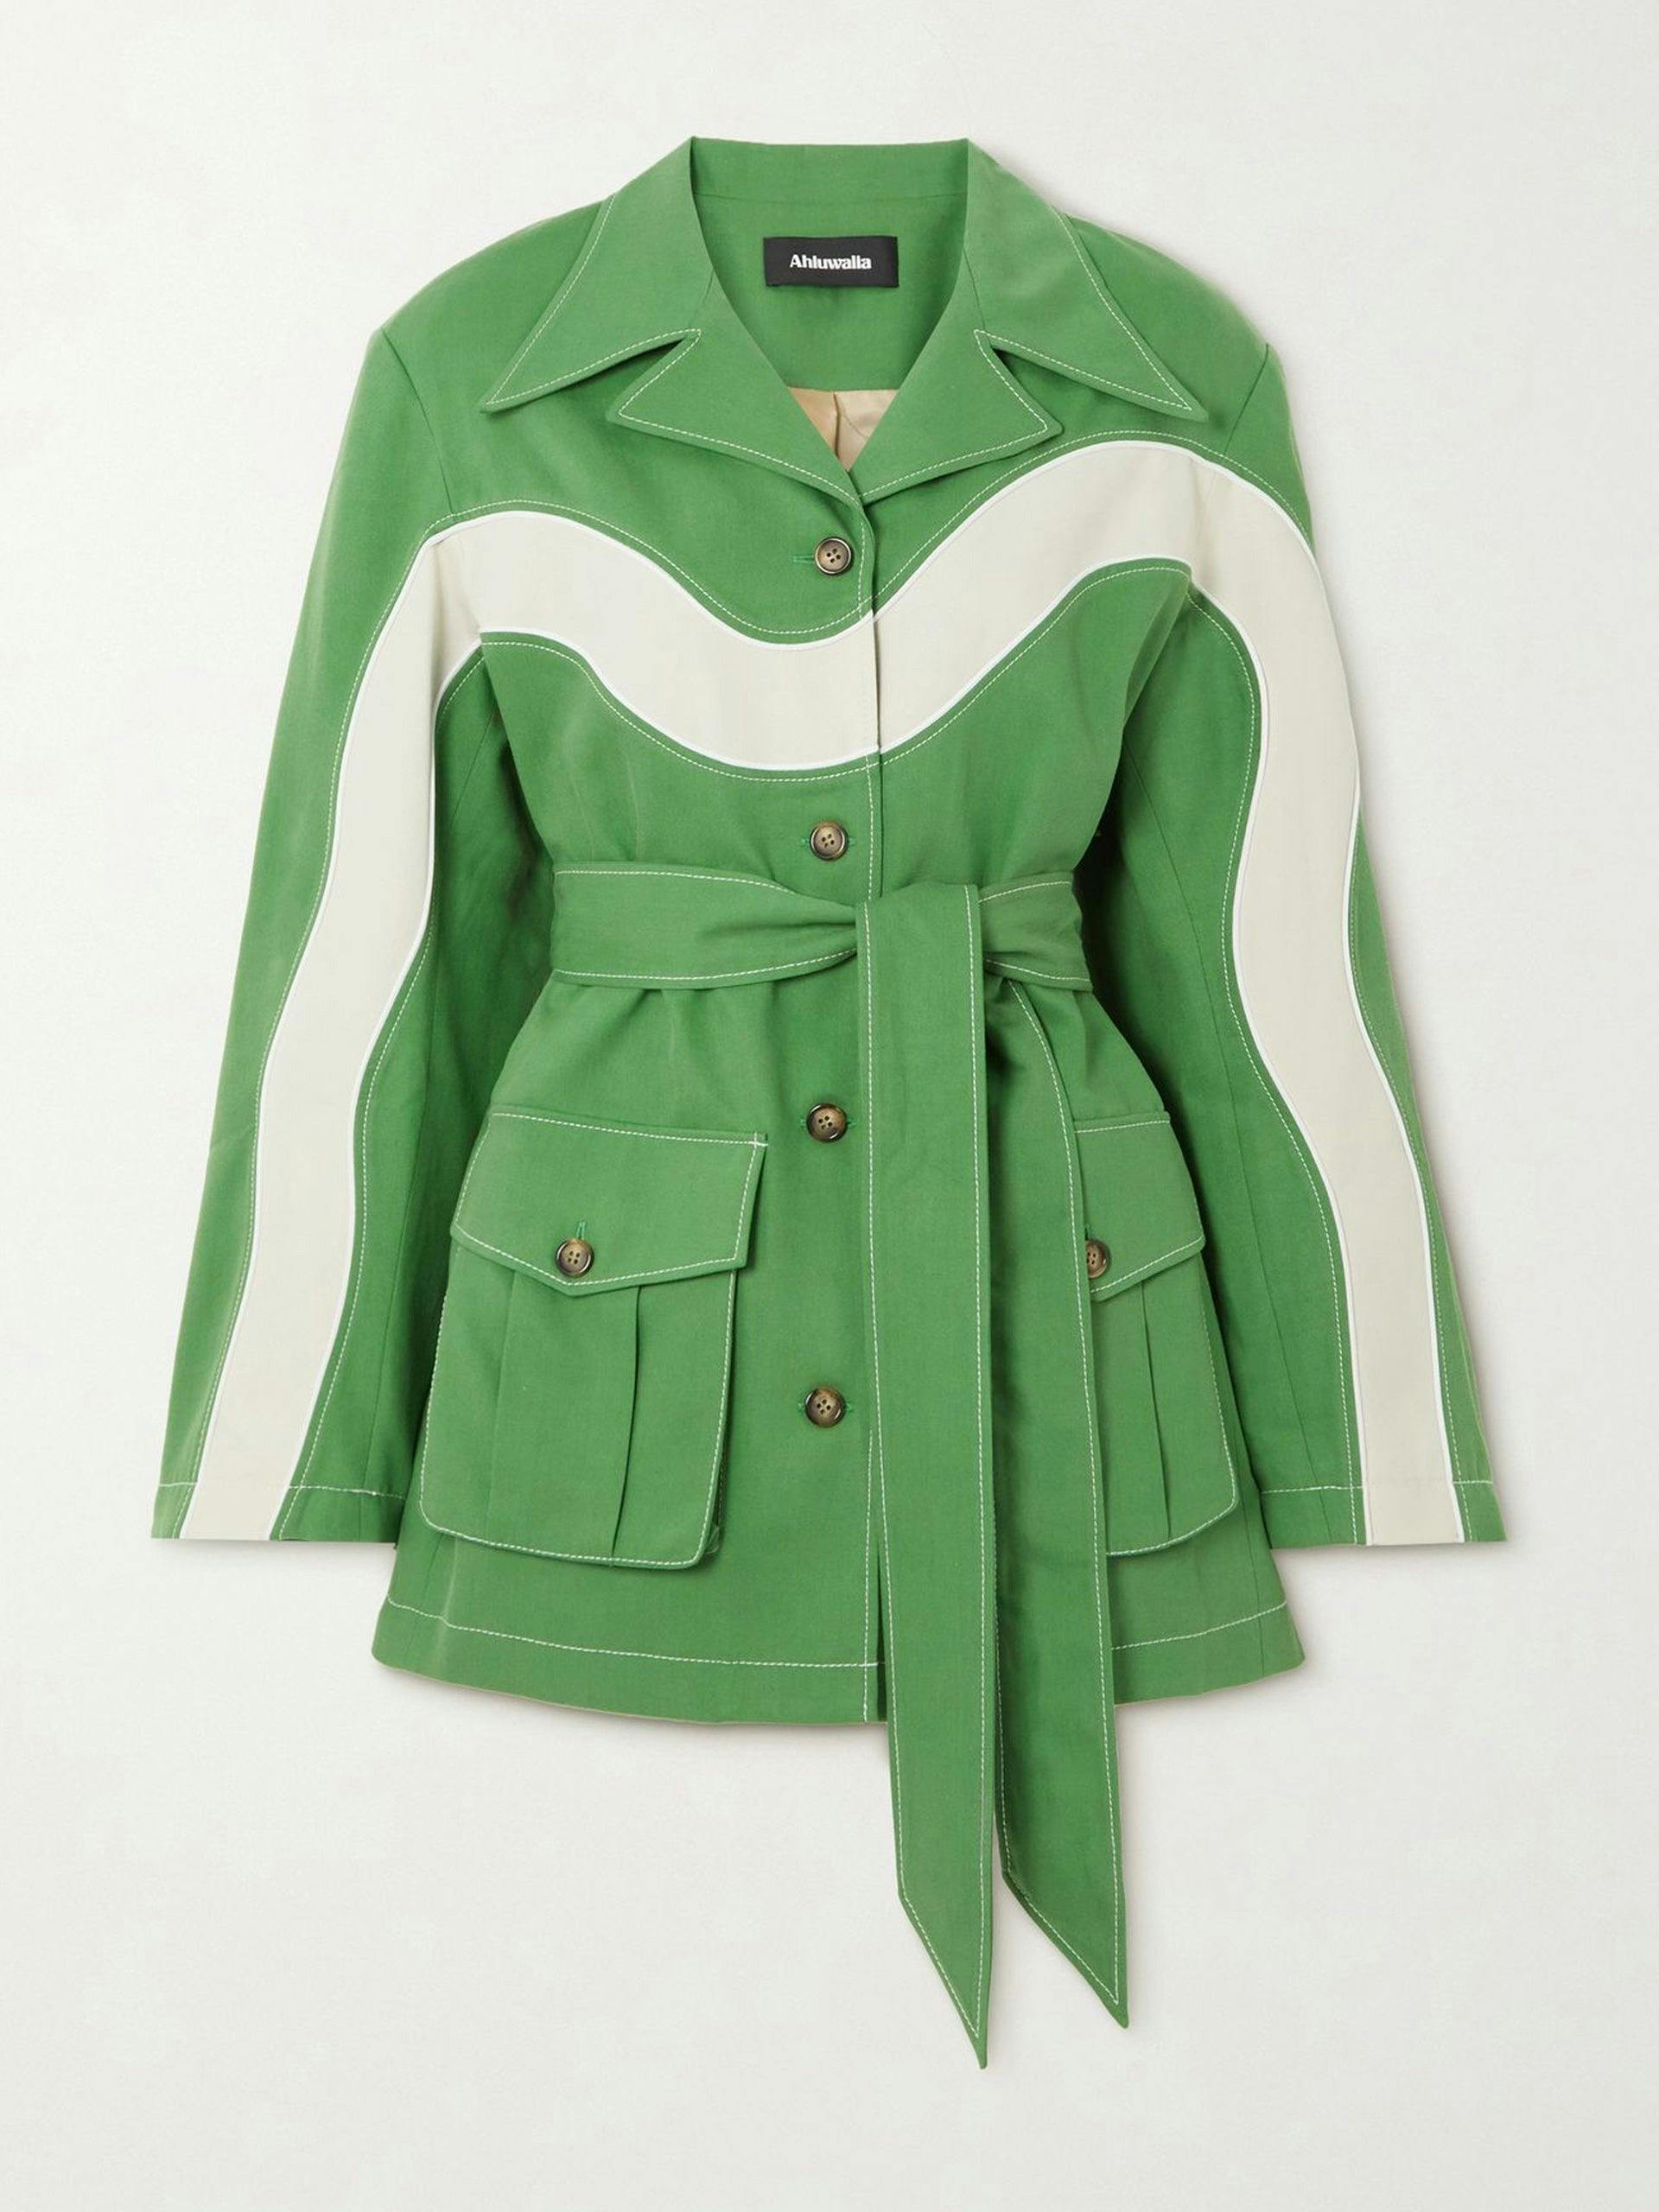 Green and white belted jacket